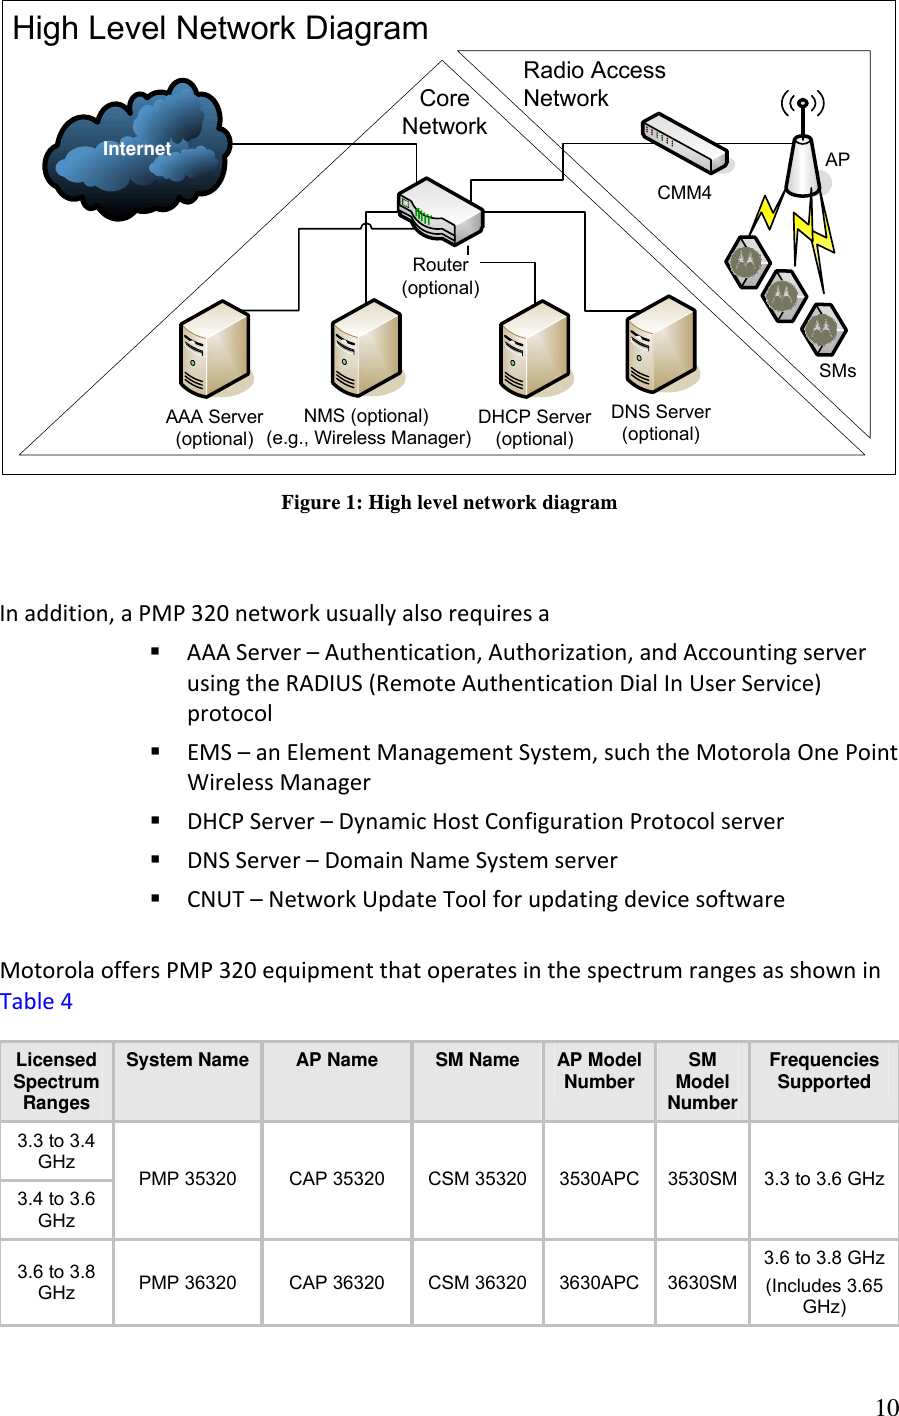 High Level Network DiagramCore NetworkInternetRadio Access NetworkAPCMM4DHCP Server(optional)NMS (optional)(e.g., Wireless Manager)SMsAAA Server(optional)Router(optional)DNS Server(optional) Figure 1: High level network diagram    Inaddition,aPMP320networkusuallyalsorequiresa AAAServer–Authentication,Authorization,andAccountingserverusingtheRADIUS(RemoteAuthenticationDialInUserService)protocol EMS–anElementManagementSystem,suchtheMotorolaOnePointWirelessManager DHCPServer–DynamicHostConfigurationProtocolserver DNSServer–DomainNameSystemserver CNUT–NetworkUpdateToolforupdatingdevicesoftware MotorolaoffersPMP320equipmentthatoperatesinthespectrumrangesasshowninTable4 Licensed Spectrum Ranges System Name  AP Name  SM Name  AP Model Number  SM Model Number Frequencies Supported 3.3 to 3.4 GHz 3.4 to 3.6 GHz PMP 35320  CAP 35320  CSM 35320  3530APC  3530SM  3.3 to 3.6 GHz 3.6 to 3.8 GHz  PMP 36320  CAP 36320  CSM 36320  3630APC  3630SM 3.6 to 3.8 GHz (Includes 3.65 GHz)  10